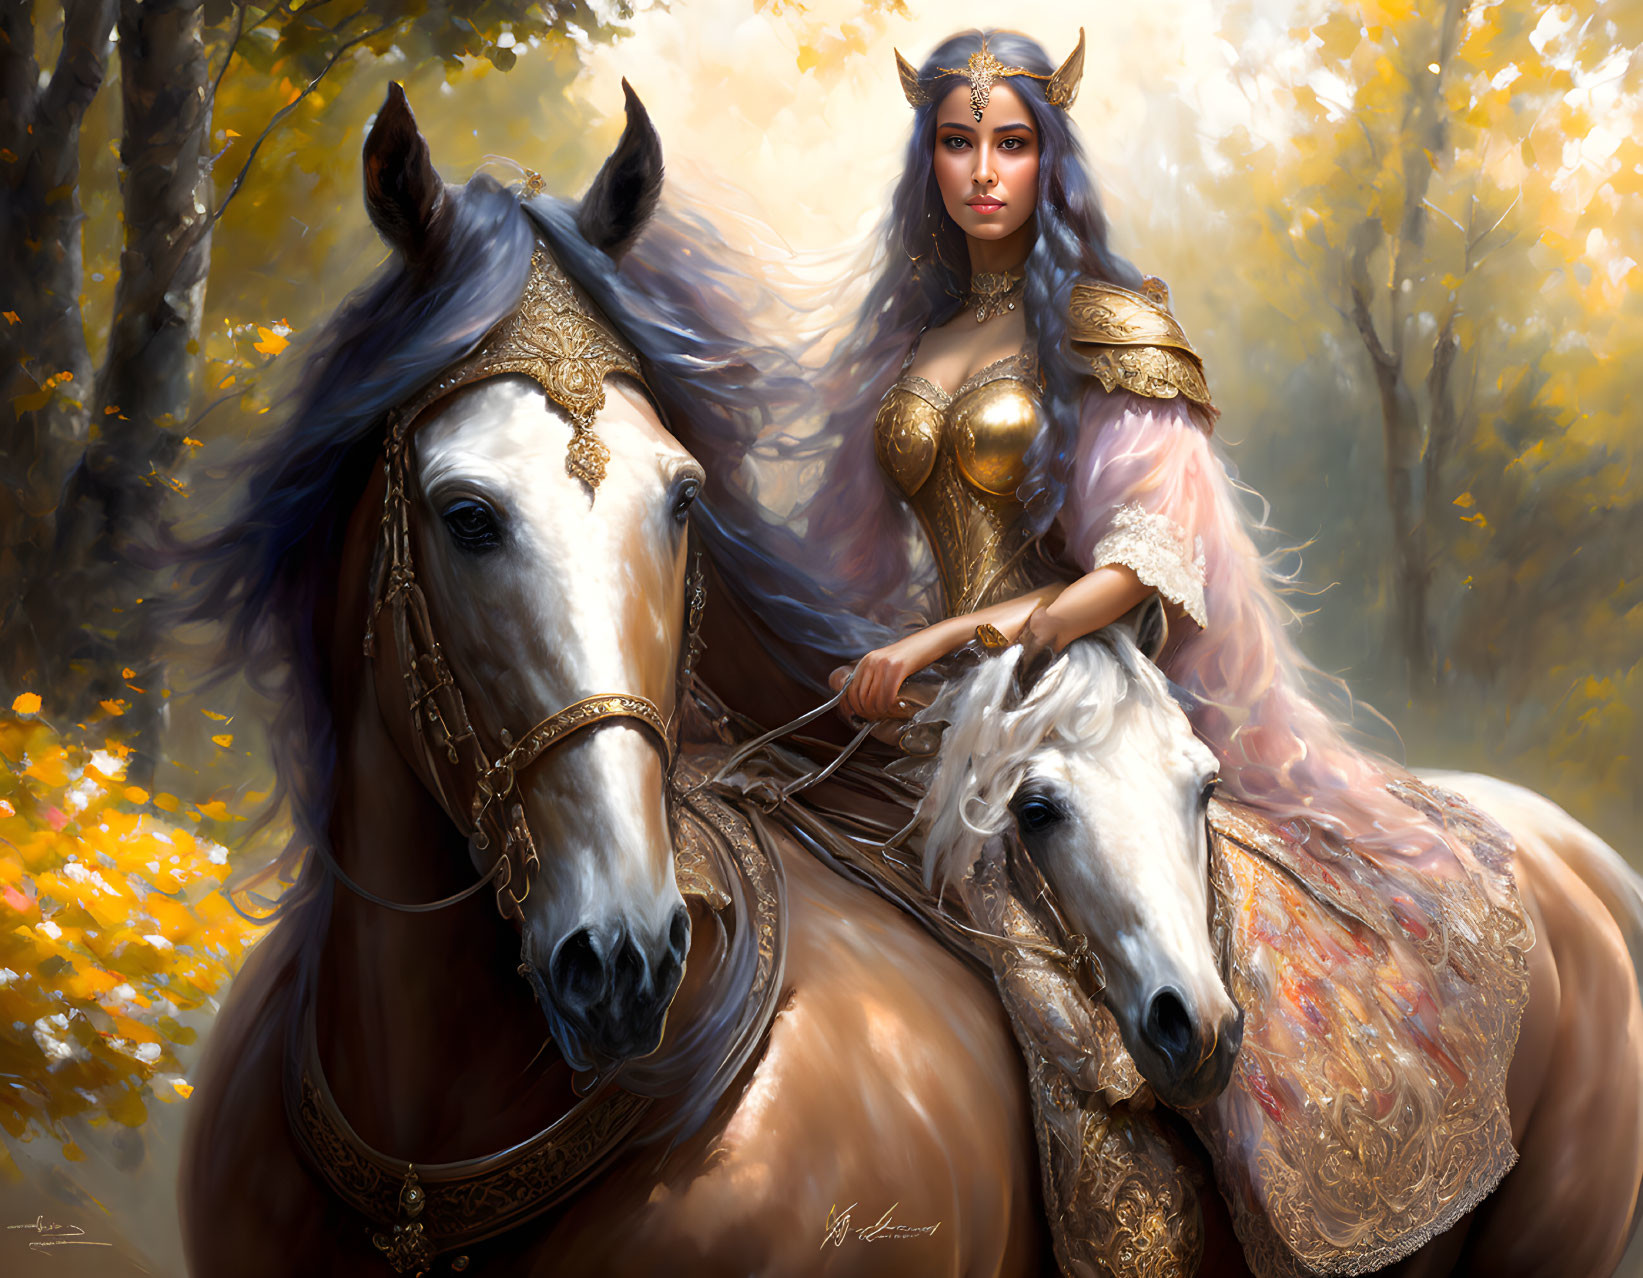 Regal woman in ornate armor on white horse in golden forest